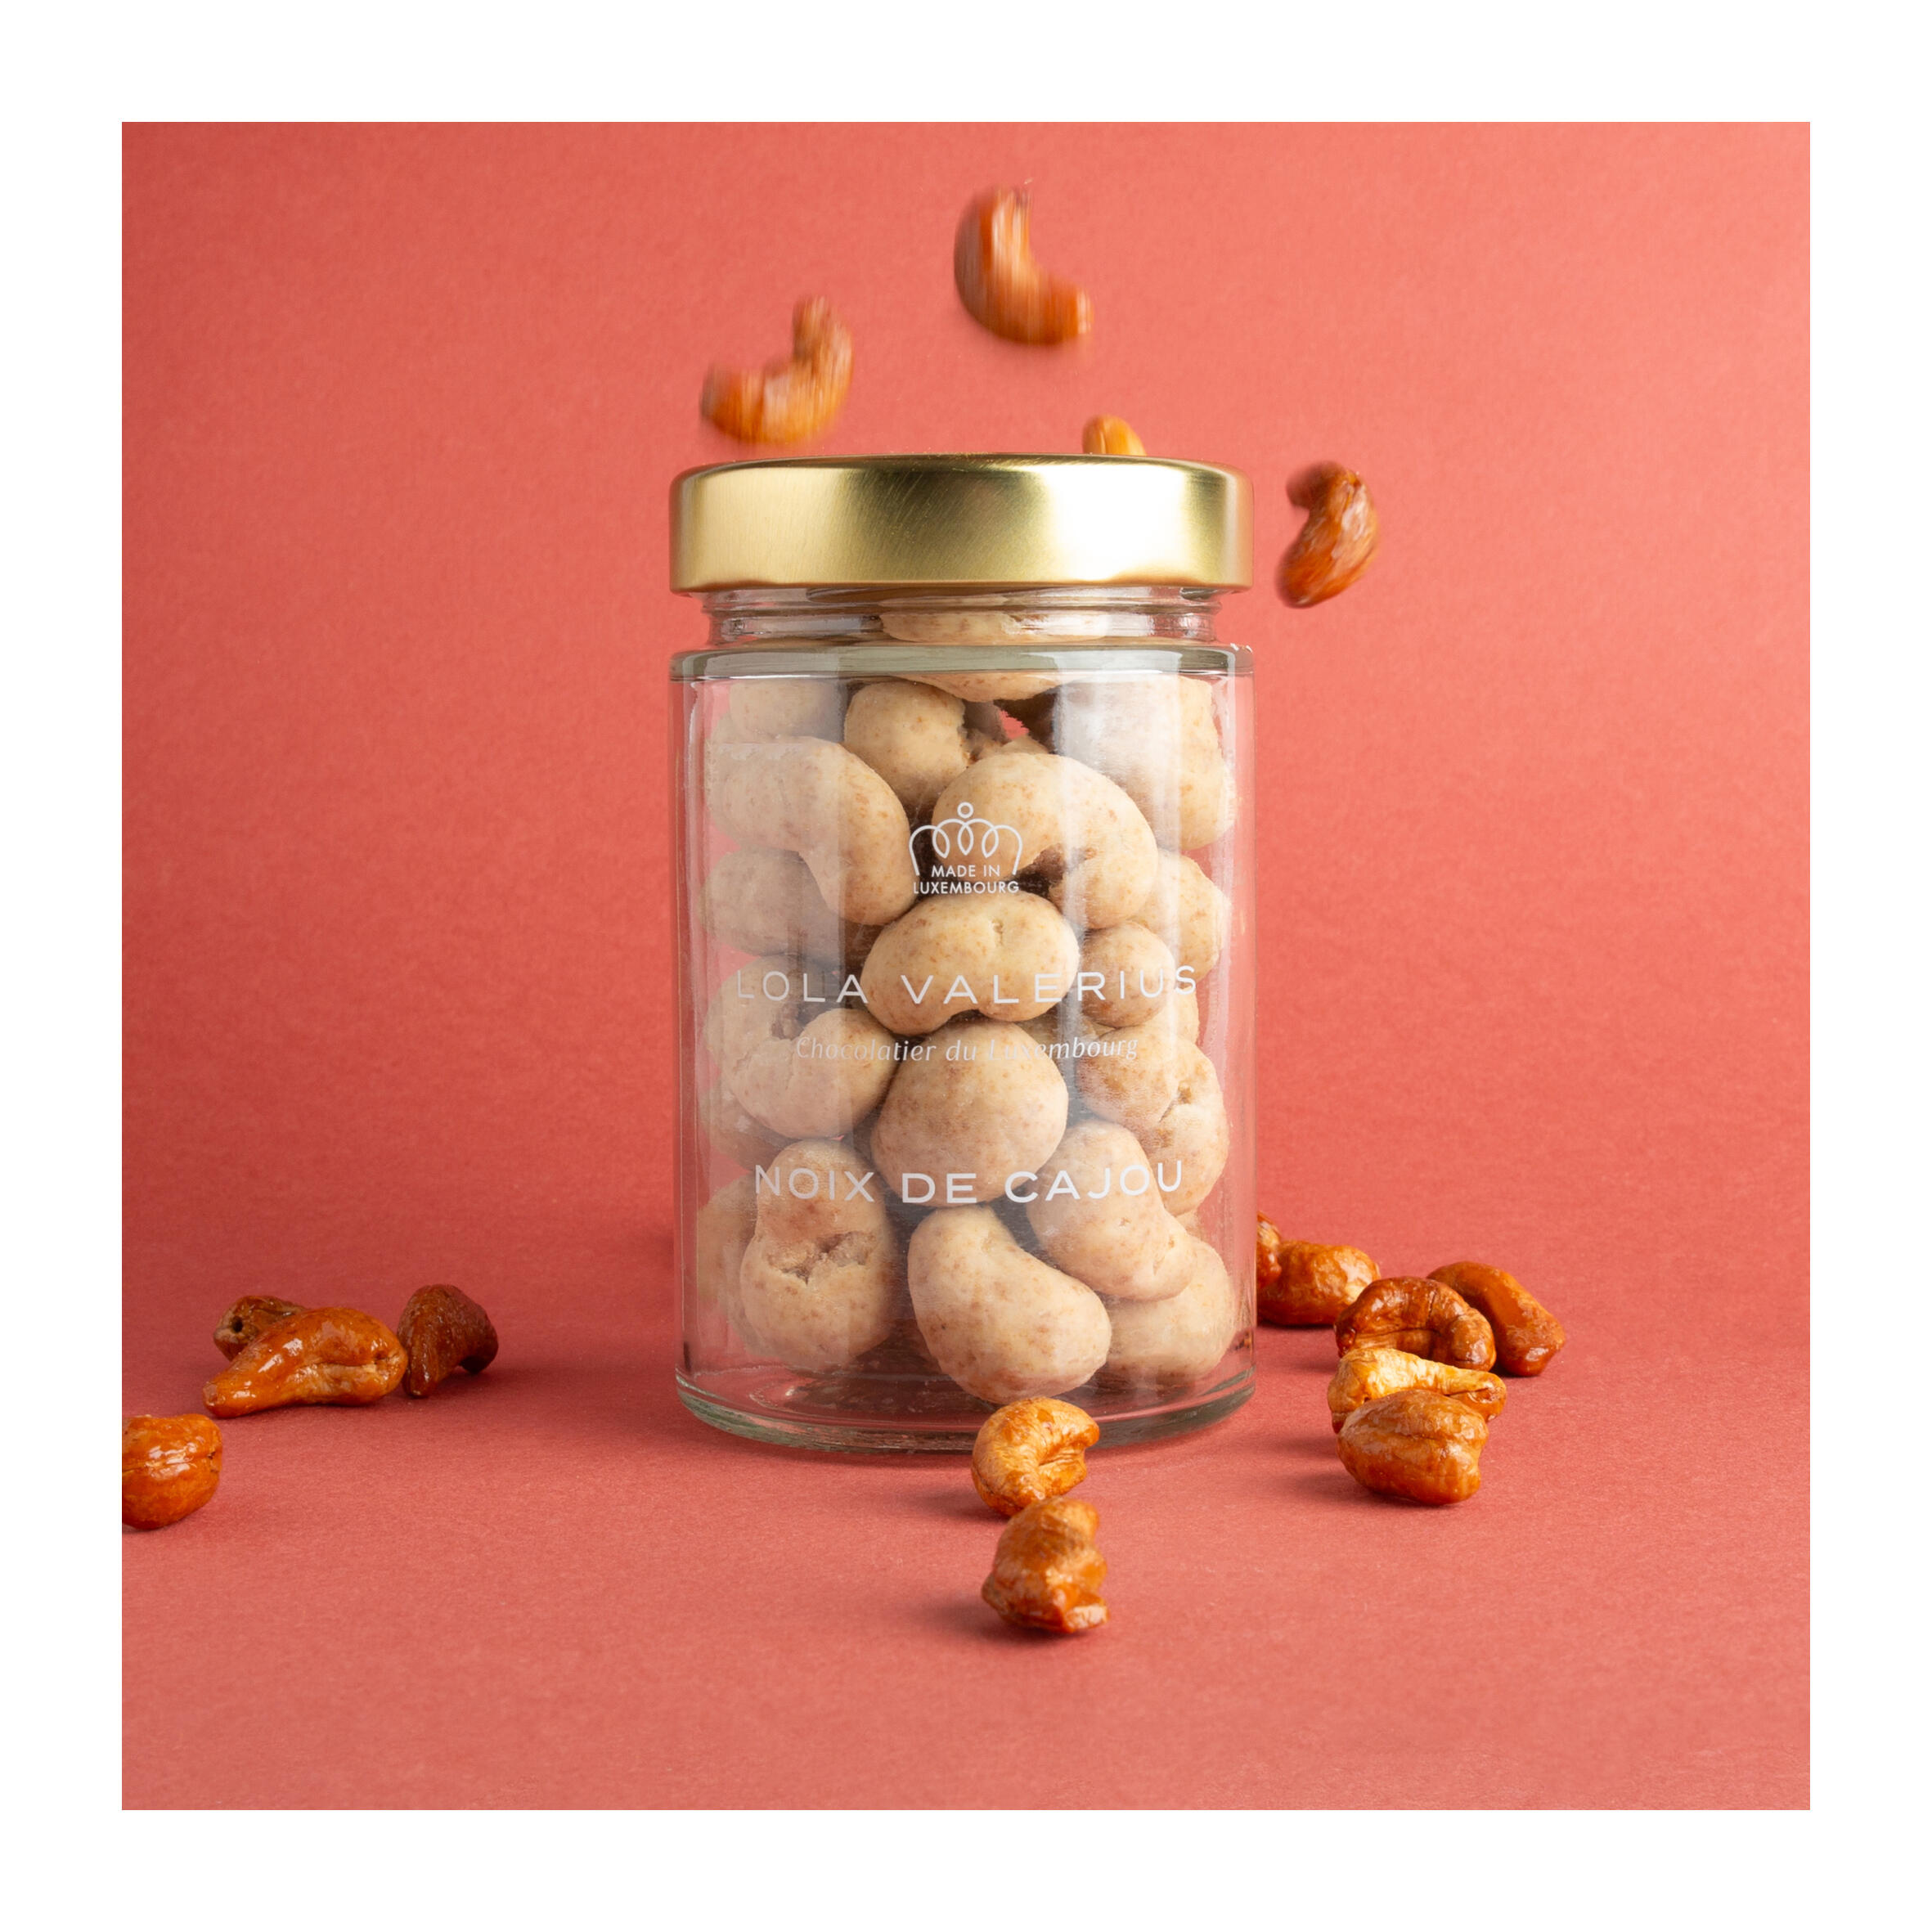 Chocolate-coated cashew nuts - white chocolate - speculoos